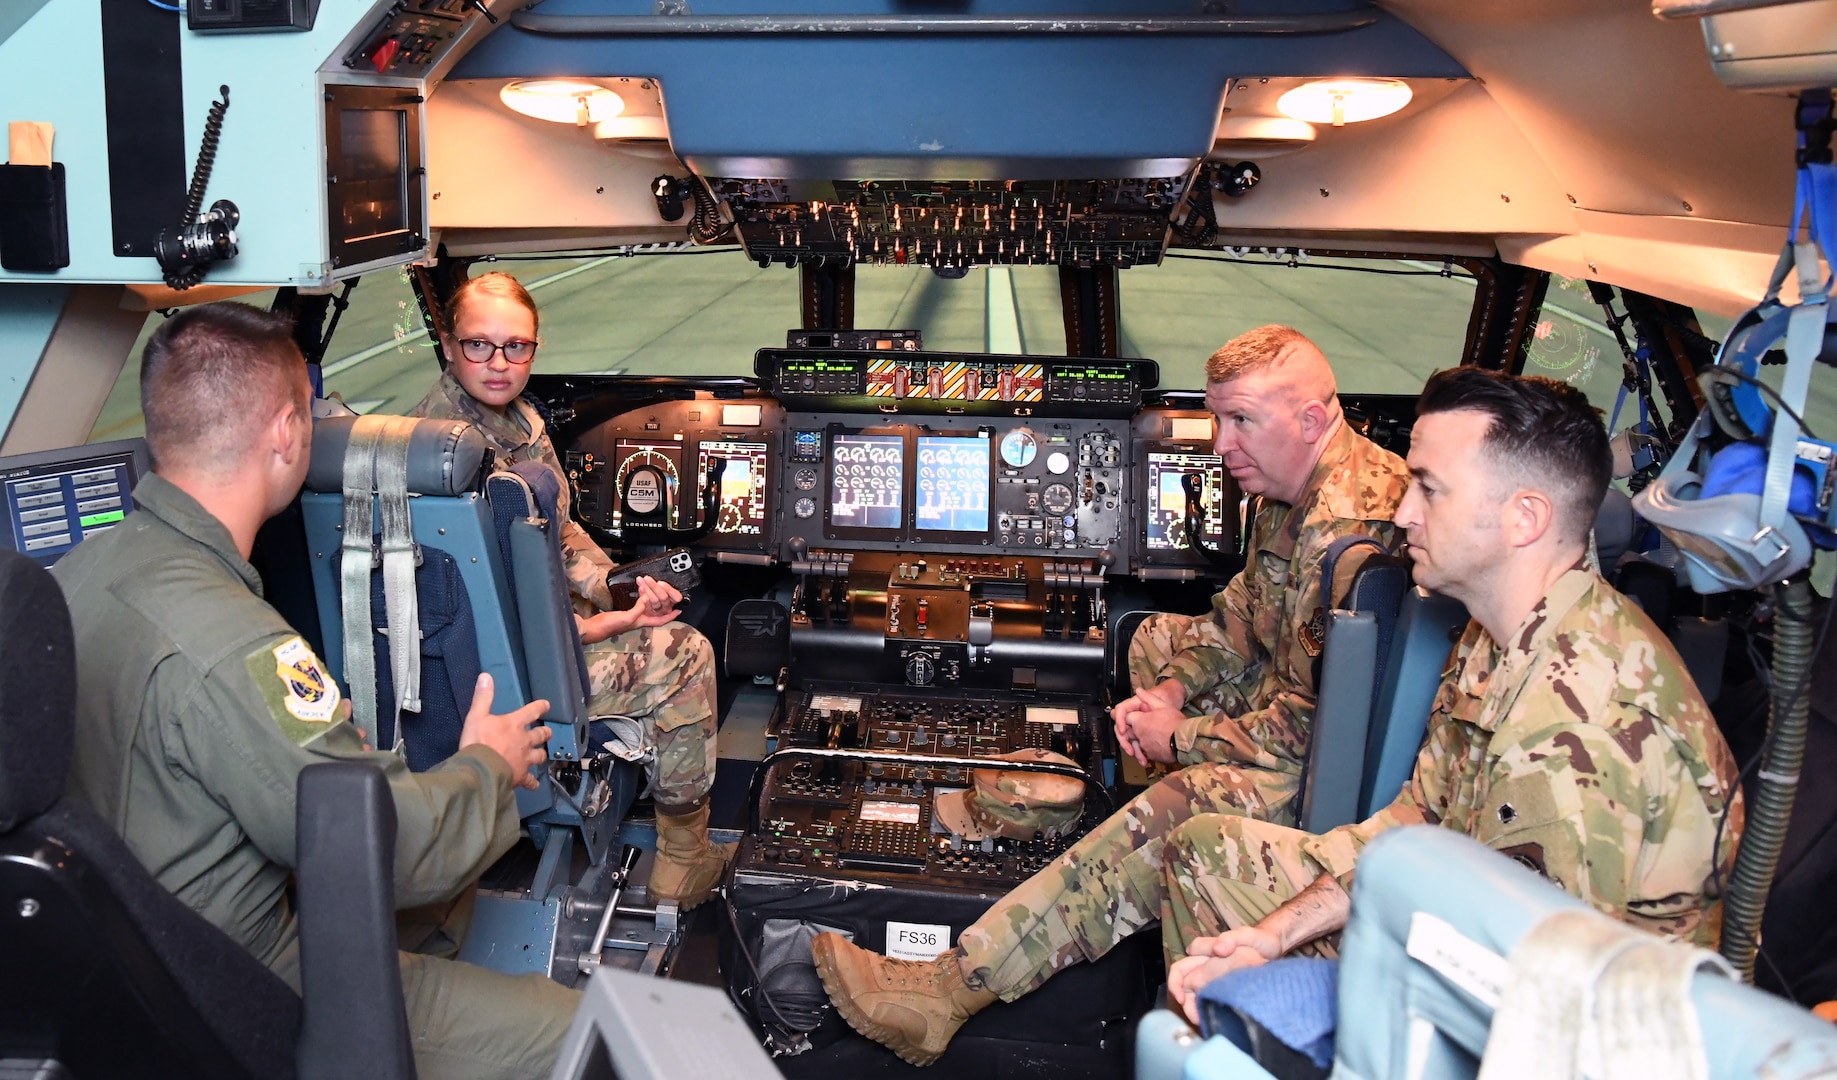 Tech. Sgt. Morgan Grebens (middle-left), 37th Training Group, and Chief Master Sgt. Chad Bickley (middle-right), 18th Air Force command chief, listen while Master Sgt. Christopher Boots (left) and Master Sgt. Erik Dunning (right), both with Air Mobility Command, describe how instructors use the C-5M Super Galaxy simulator to train pilots during a tour of the 733rd Training Squadron at Joint Base San Antonio-Lackland, Texas, July 8, 2021. As part of a multi-day tour of several JBSA units, Bickley visited with 733rd TRS leaders to discuss training challenges and strengths, see the virtual reality training equipment, cargo load trainer facility and the simulator. (U.S. Air Force photo by Master Sgt. Kristian Carter)